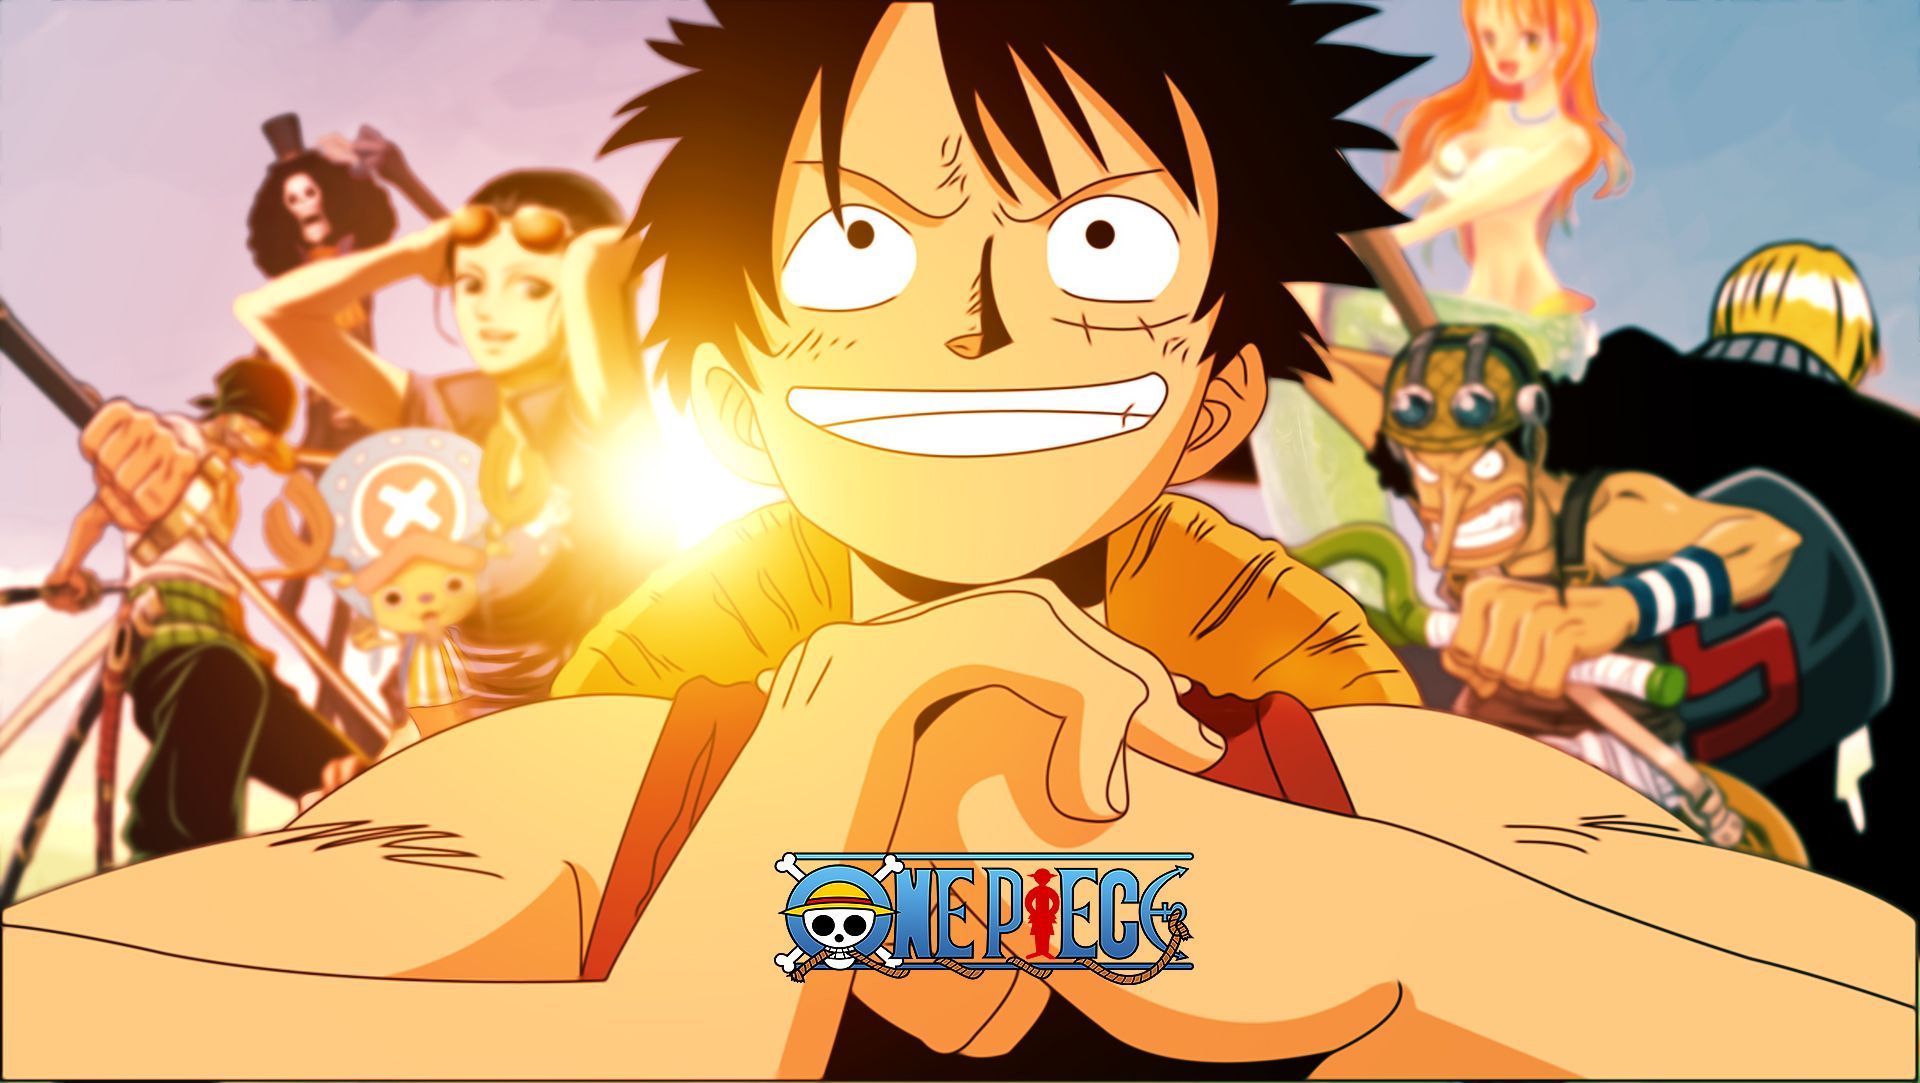 1233-one-piece-wallpaper-hd-wallpapers-free -